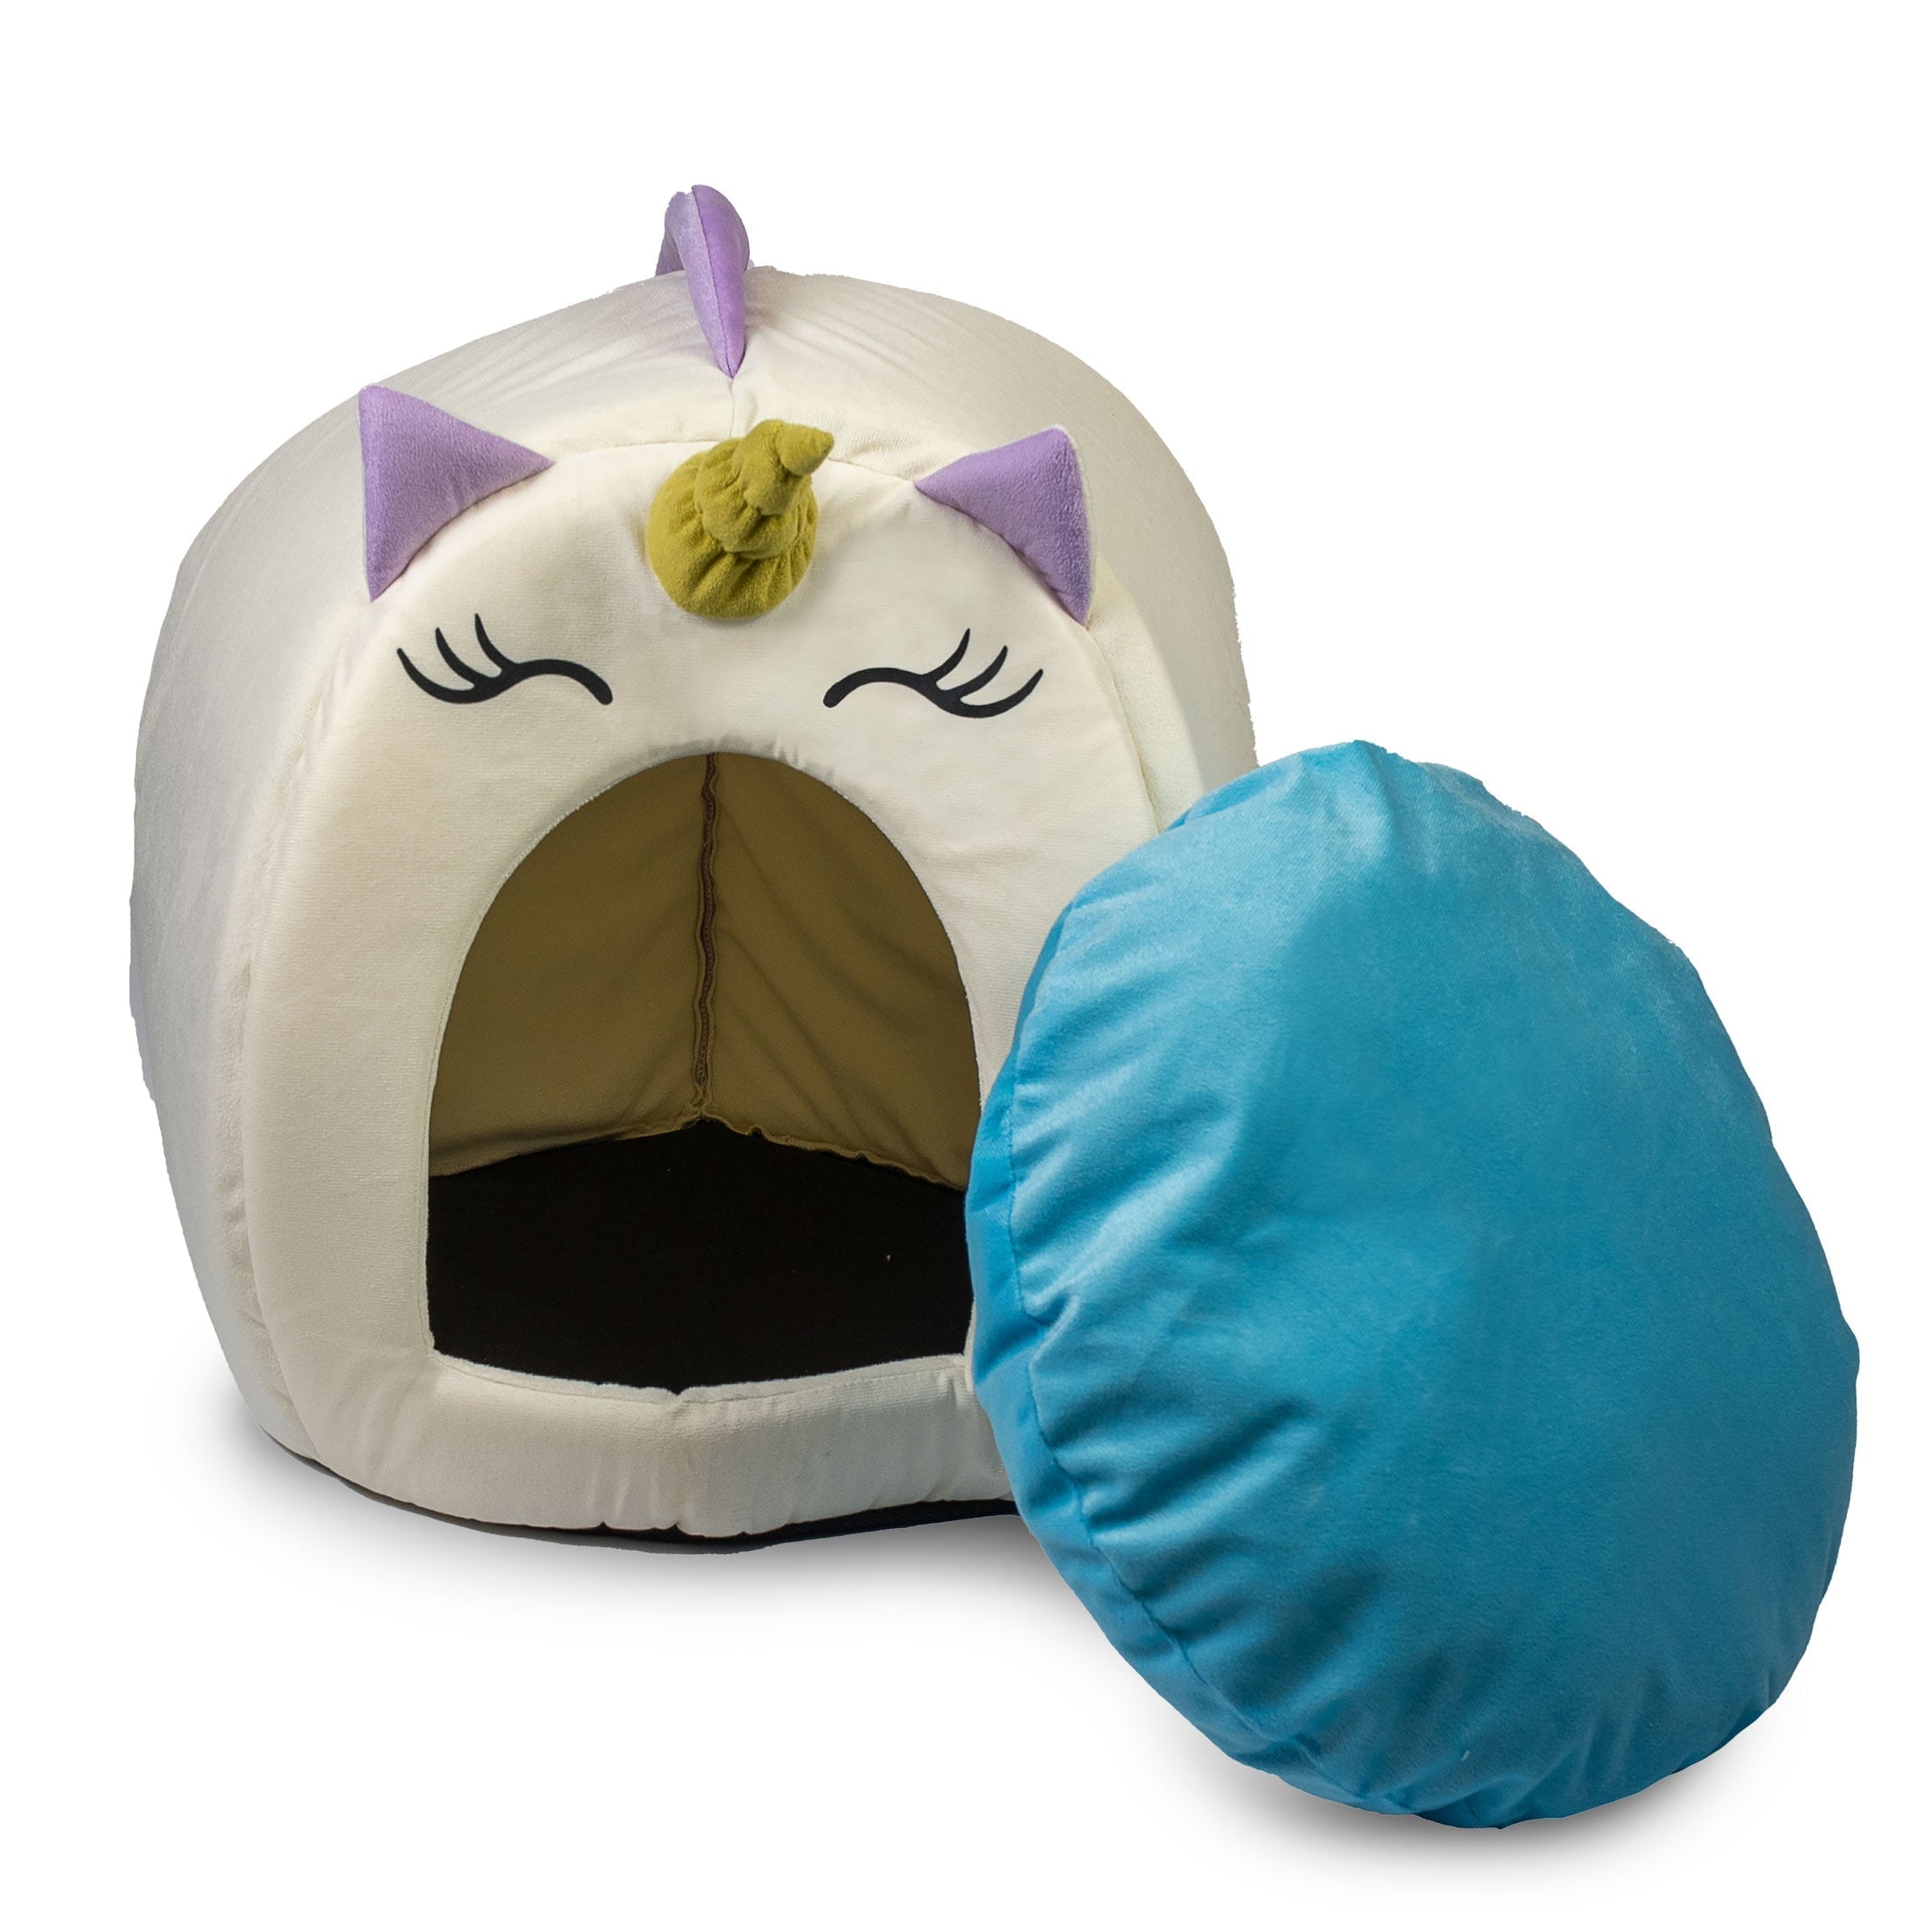 Wholesale prices with free shipping all over United States Vibrant Life Unicorn Pet Bed, Cream - Steven Deals